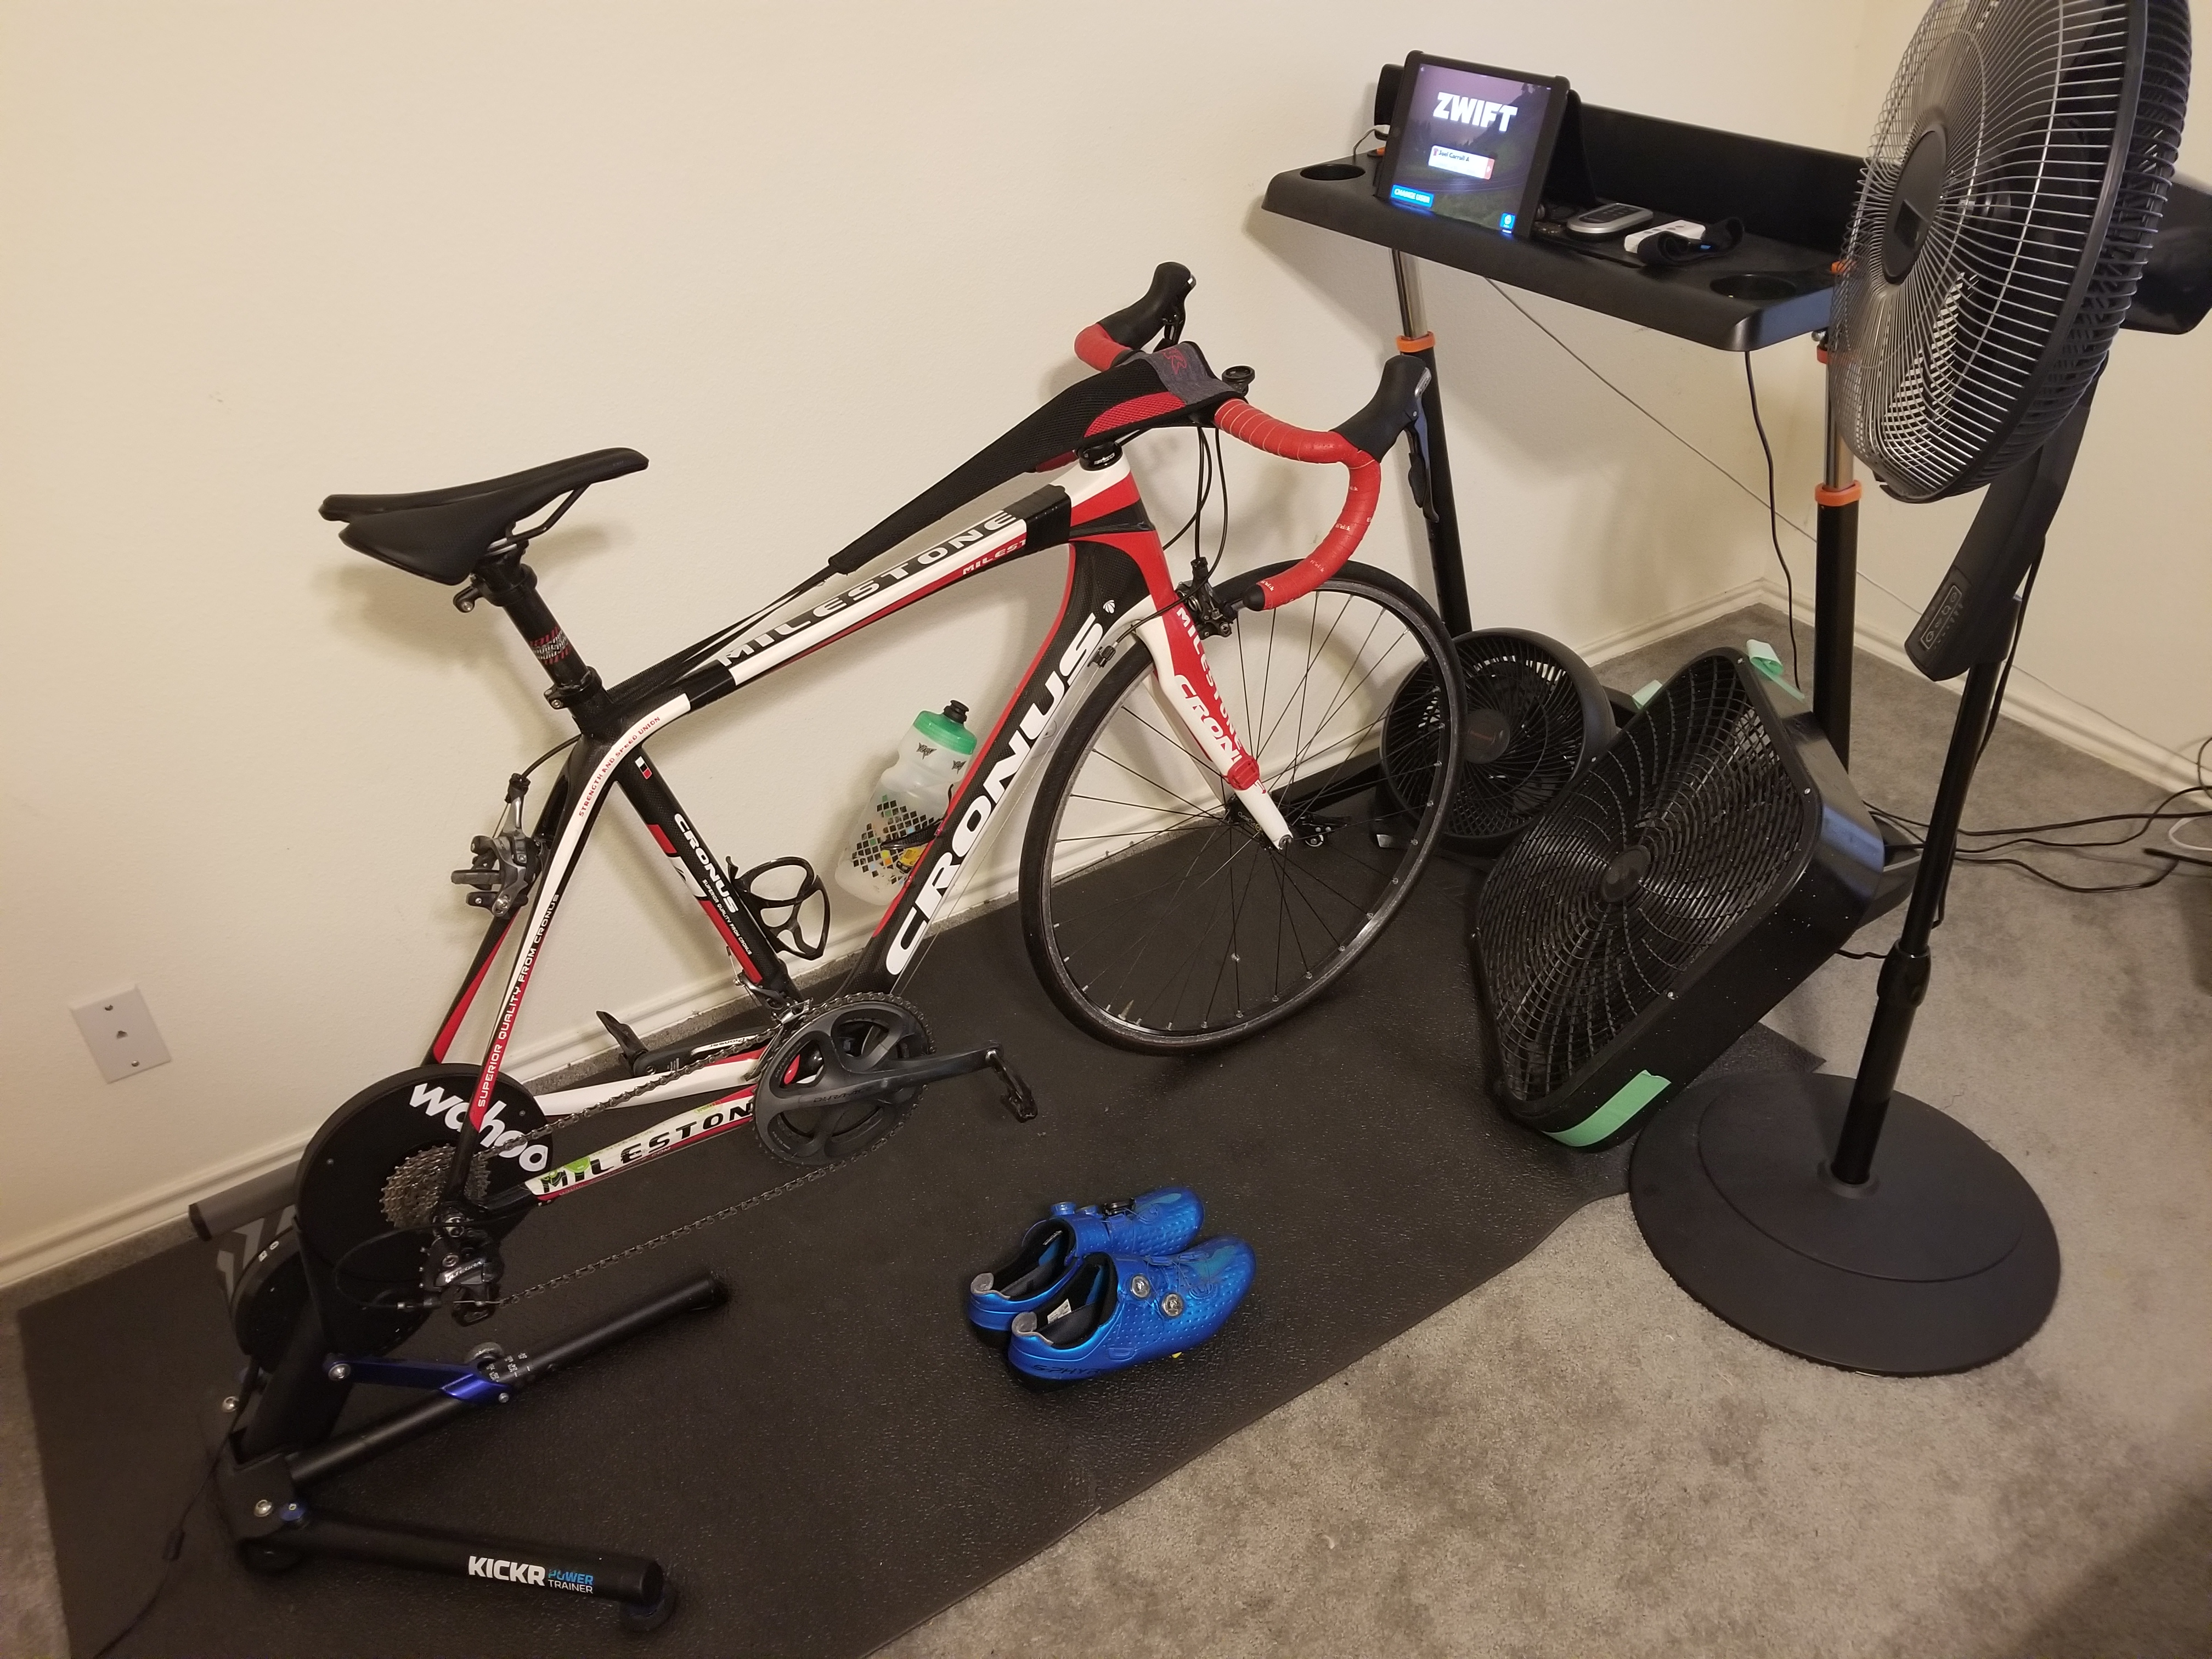 KICKR Bike ERG Mode: Why Gear Selection Matters